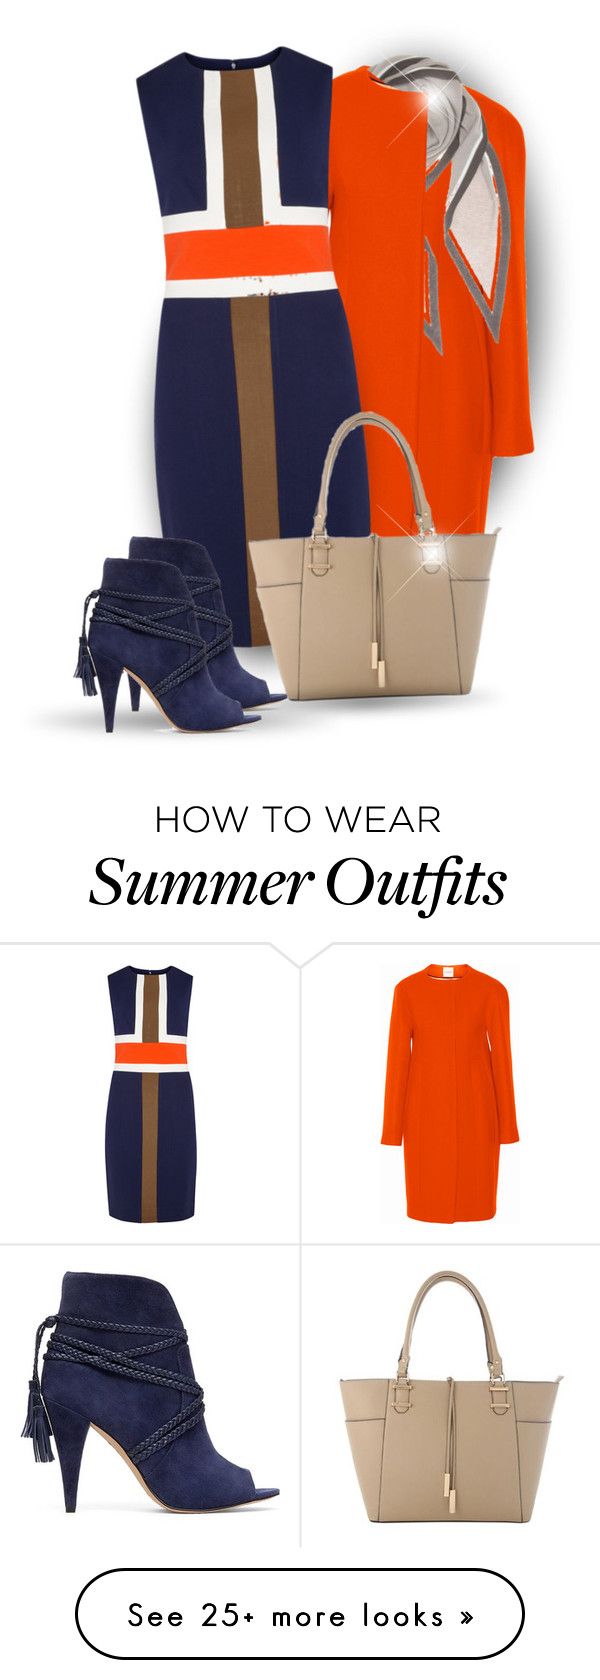 "For the love of ColourBlock! (OUTFIT ONLY!)" by bliznec on Polyvore f...